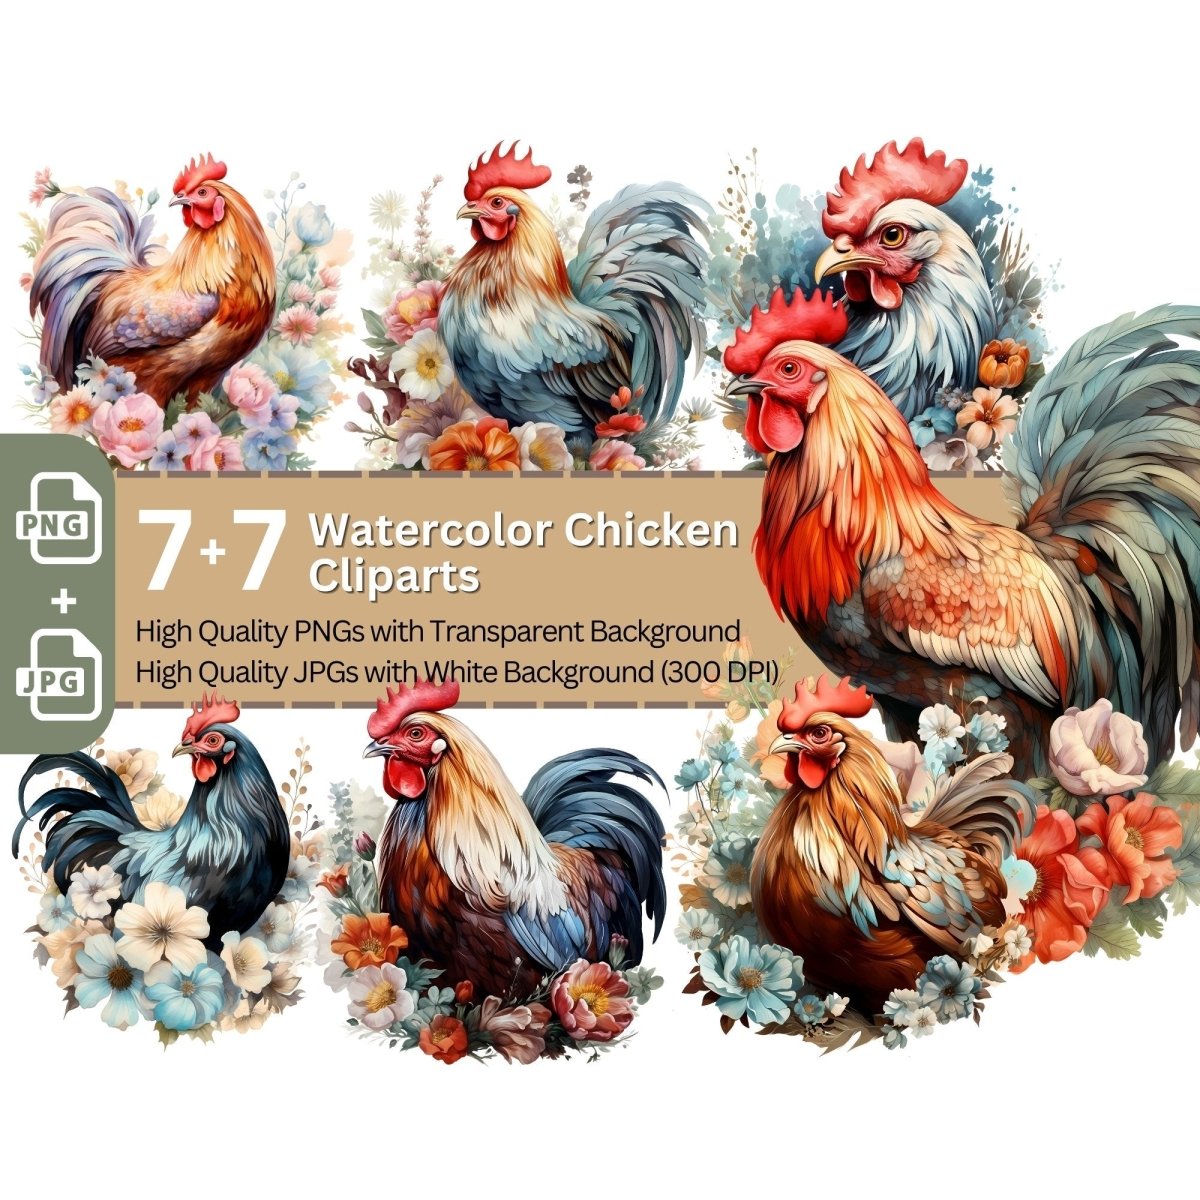 Colorful Watercolor Chickens 7+7 High Quality PNGs Clipart Bundle Rooster - Everything Pixel